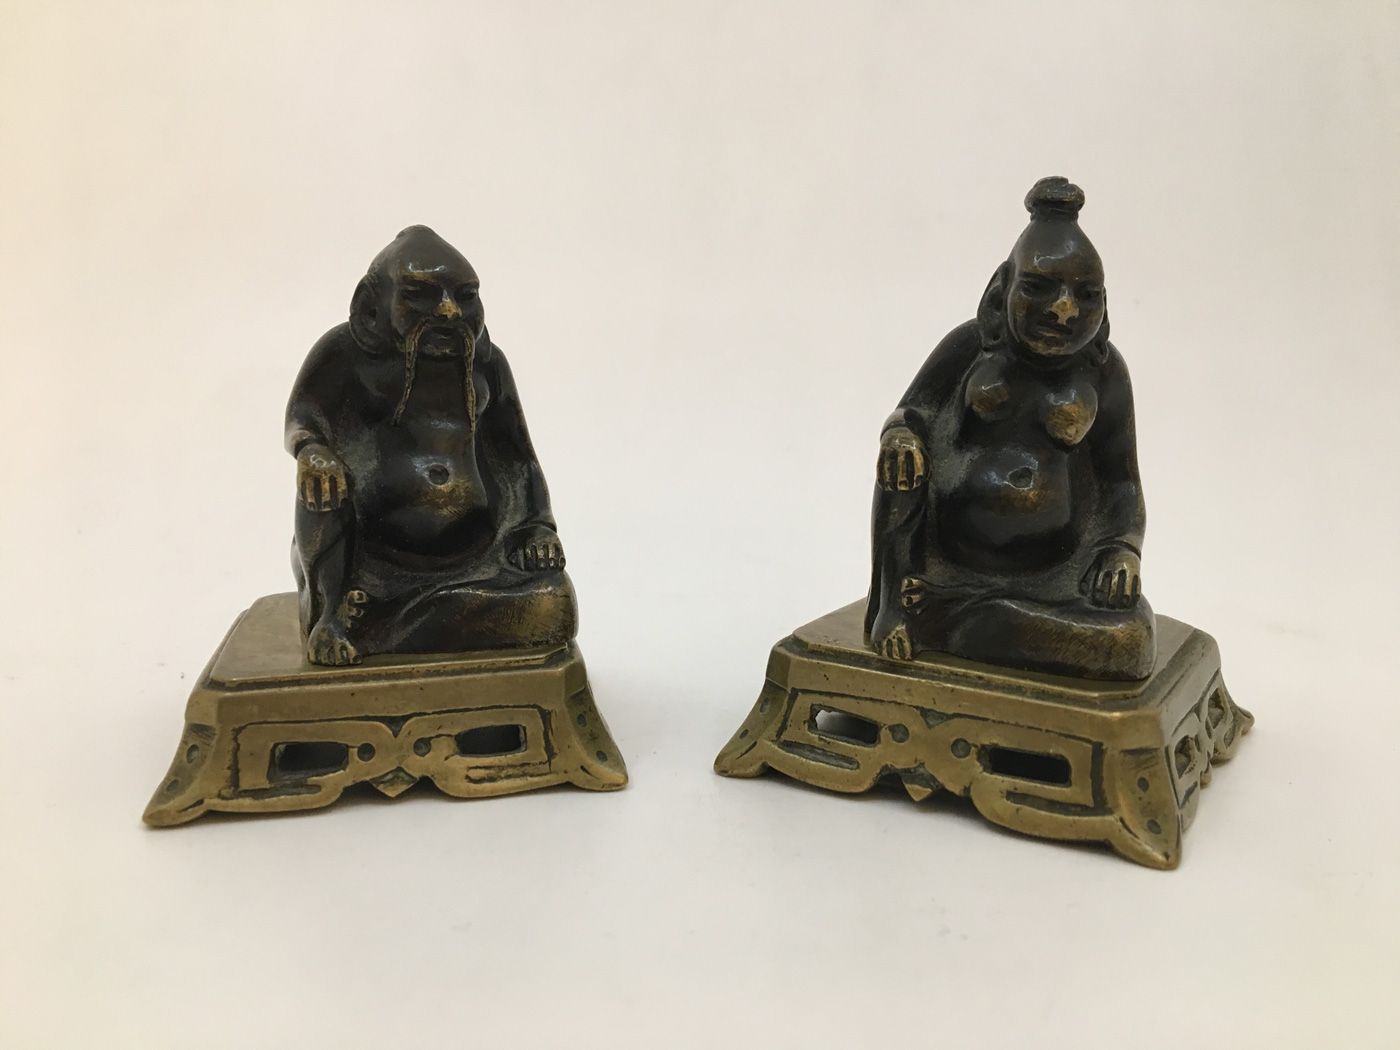 Null Asian dignitaries. 2 bronzes on base, with system. 7 x 5,5 x 5,5 cm.